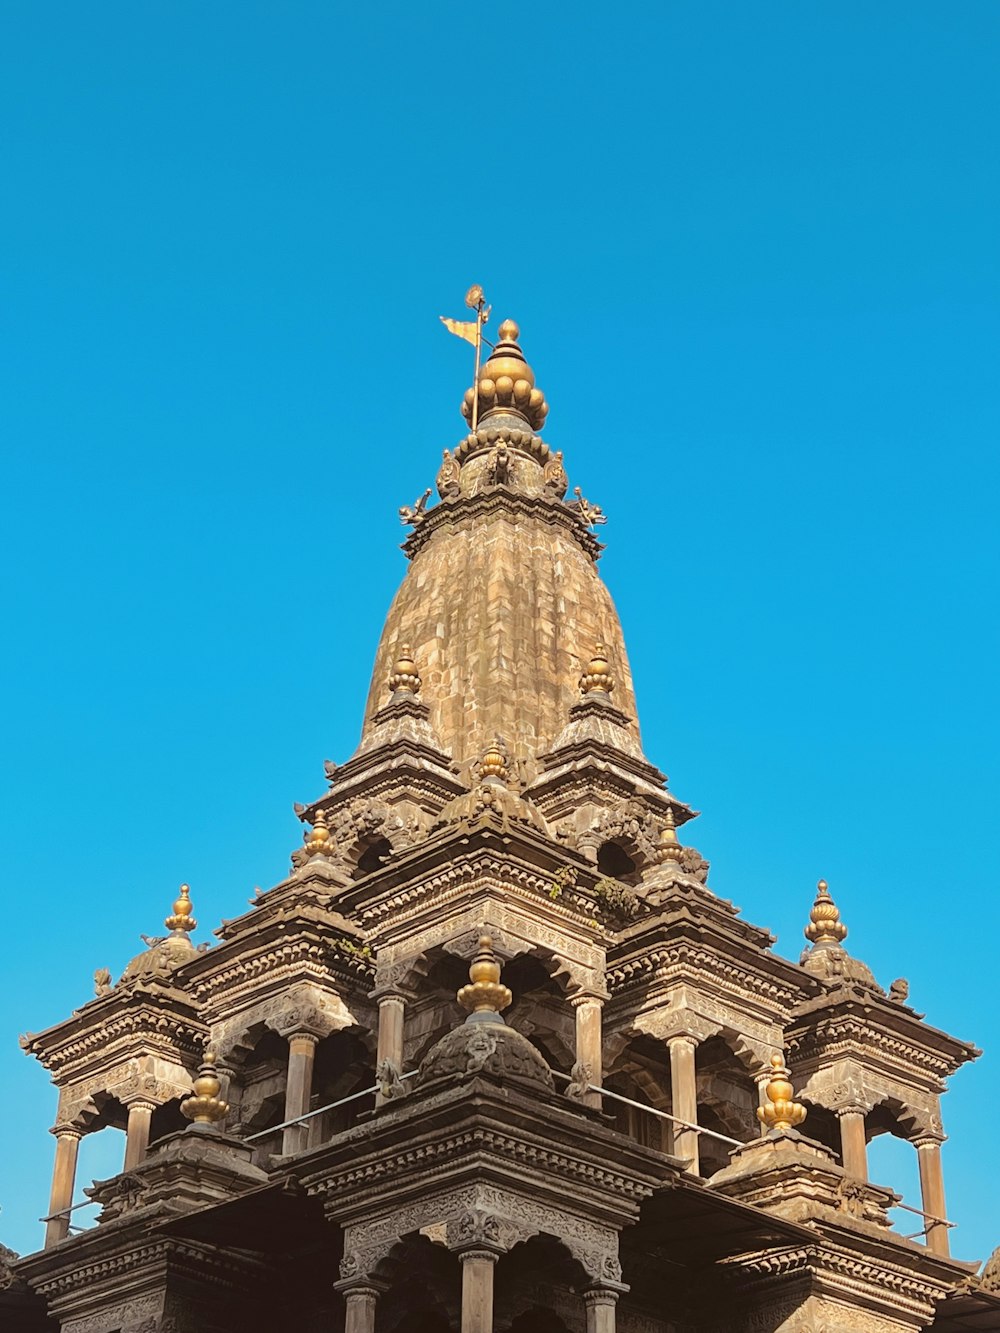 a building with a gold statue on top